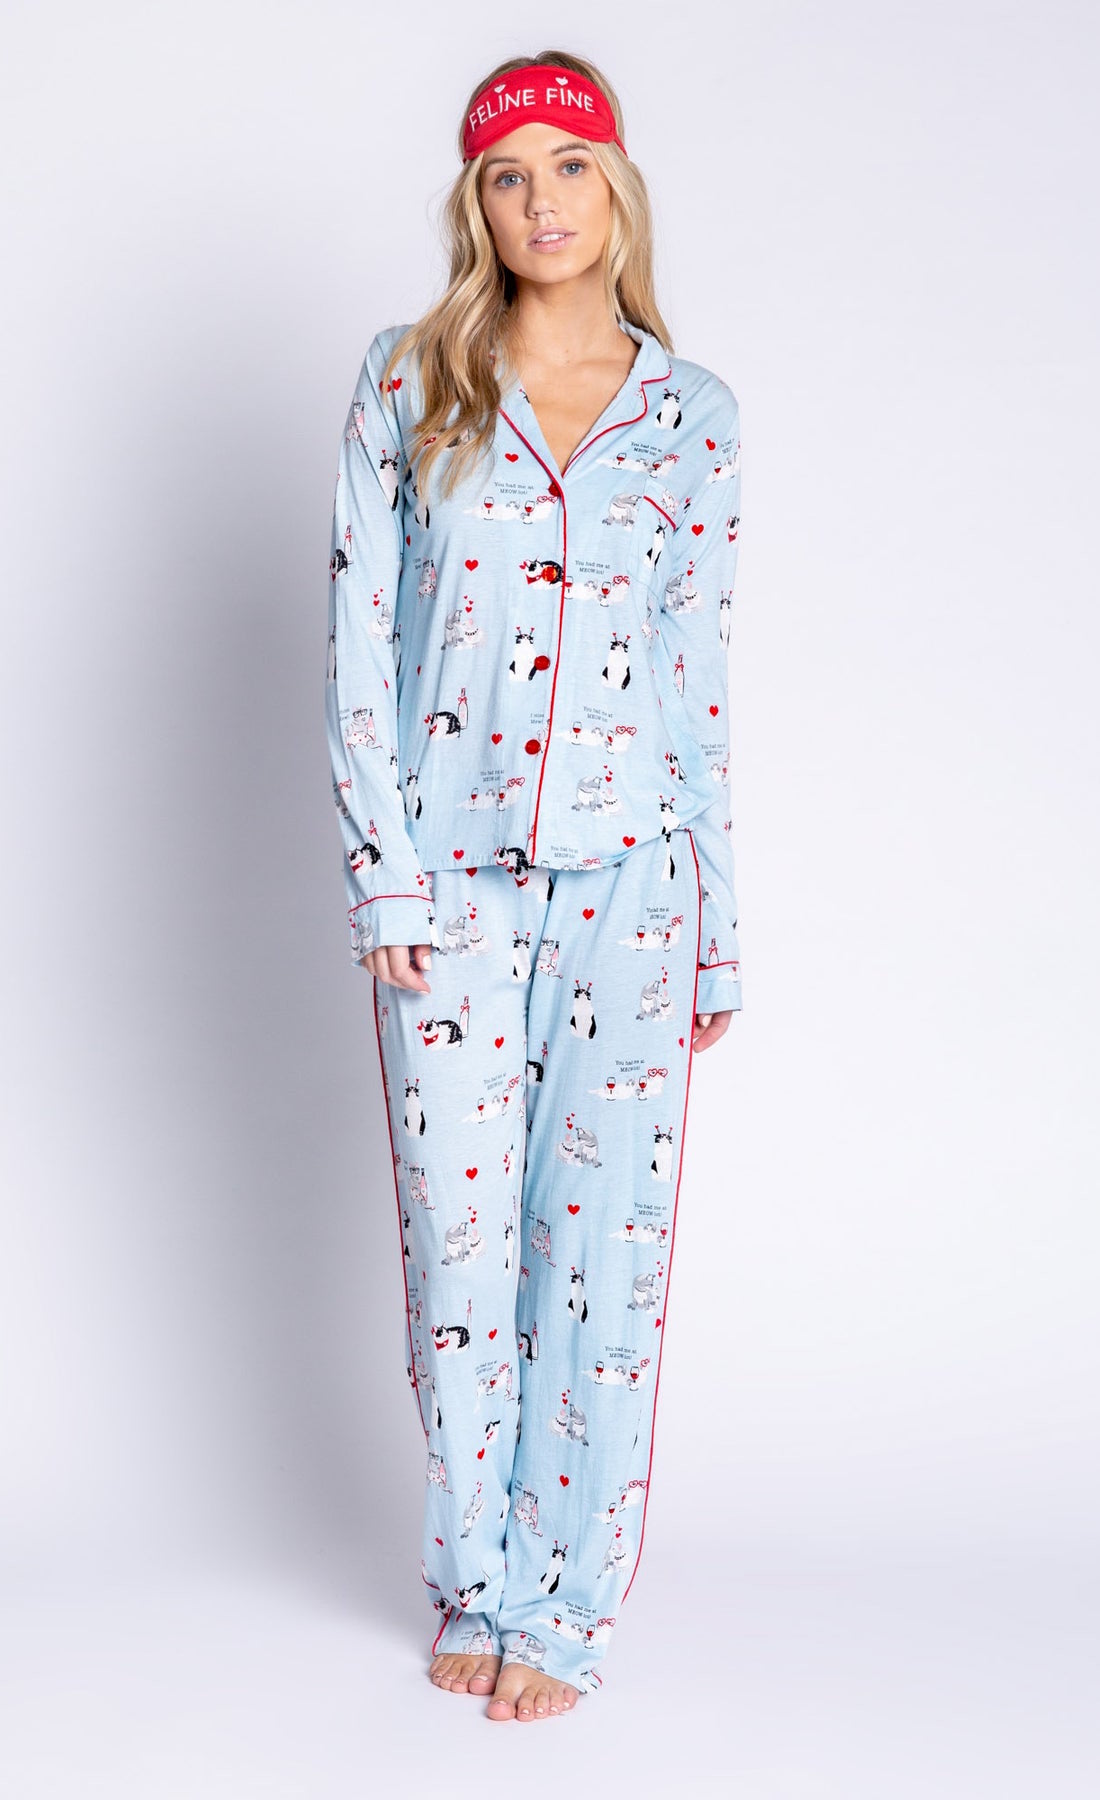 Front full body view of woman wearing the pj salvage love is a four legged word pj set. This set is light blue colored with cats printed all over it and red trim. The set has a button down shirt with long sleeves, relaxed pants, and a red sleep mask that says feline fine.